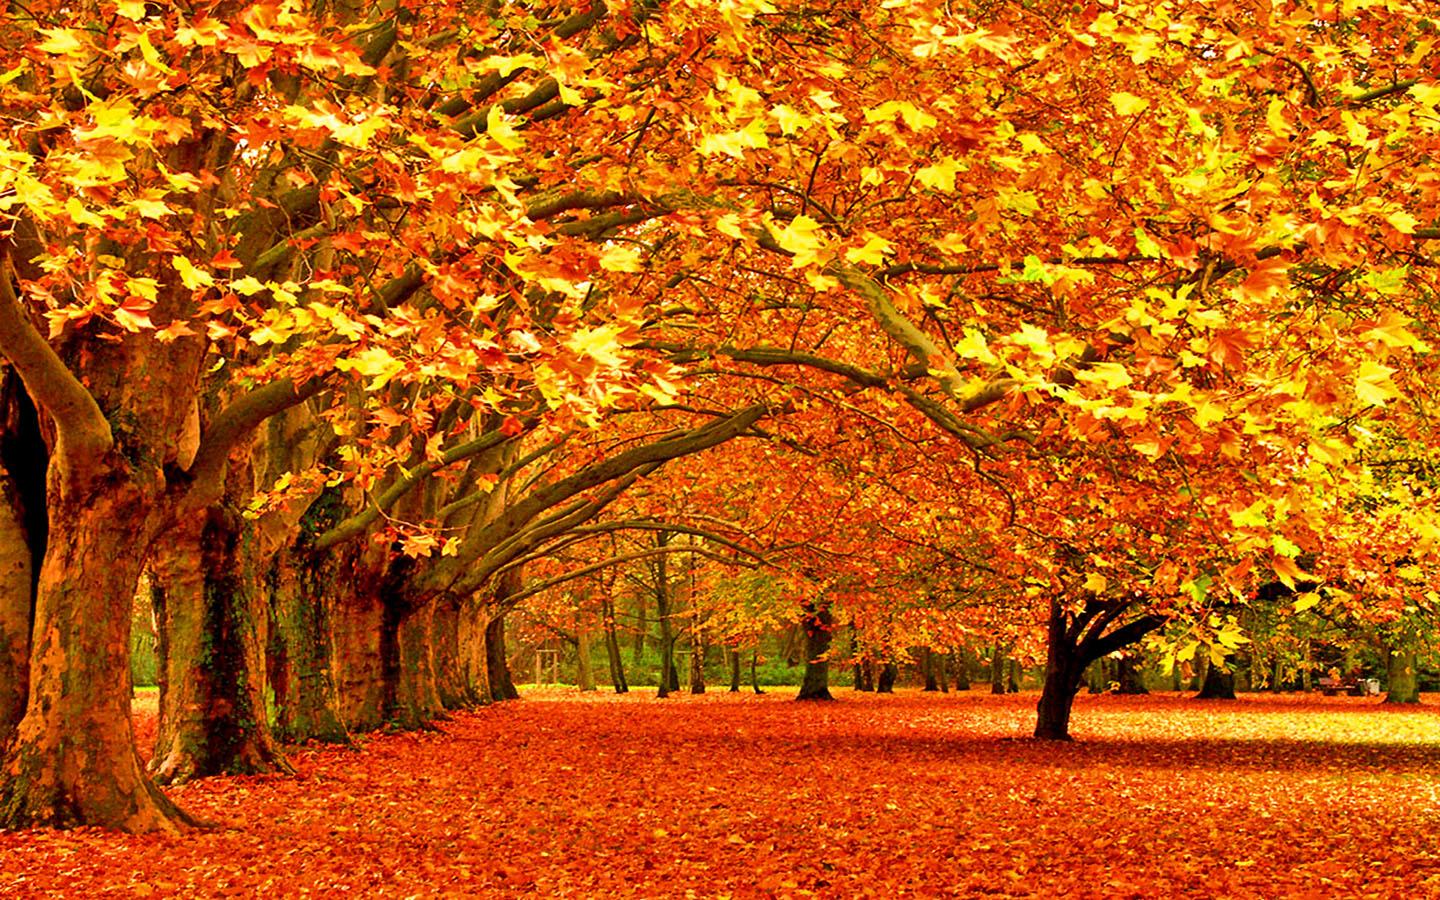 2016 First Day of Fall Quotes - 20 Best Autumn Sayings & Leaf Quotes